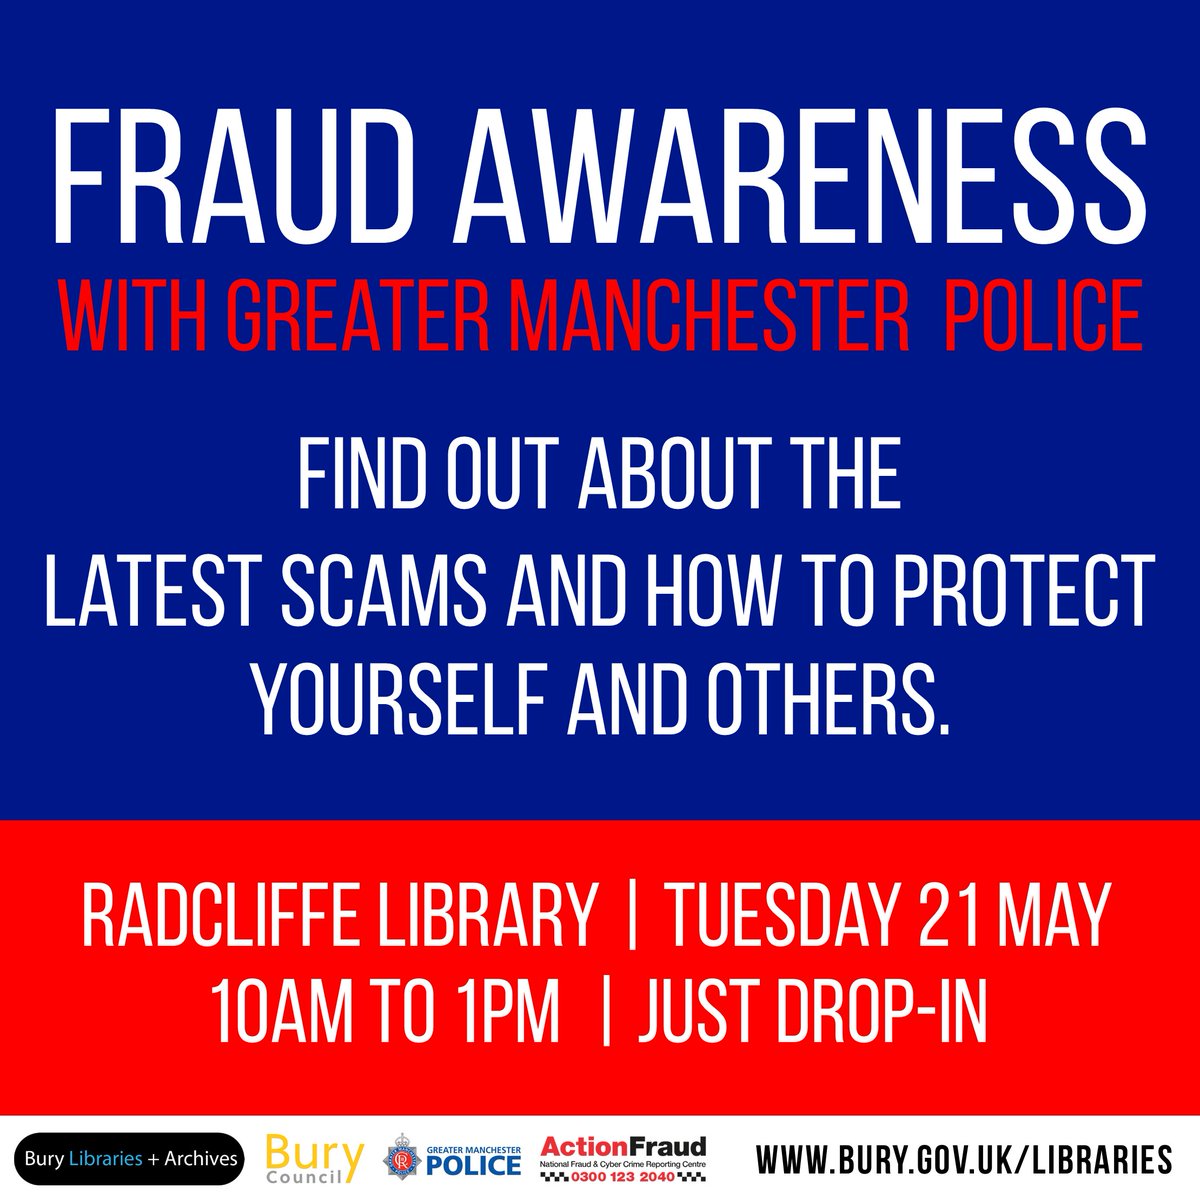 Drop into #Radcliffe Library on Tuesday 21 May between 10am and 1pm and learn how to protect yourself from fraud and scams. @BuryCouncil @GMPolice @actionfrauduk